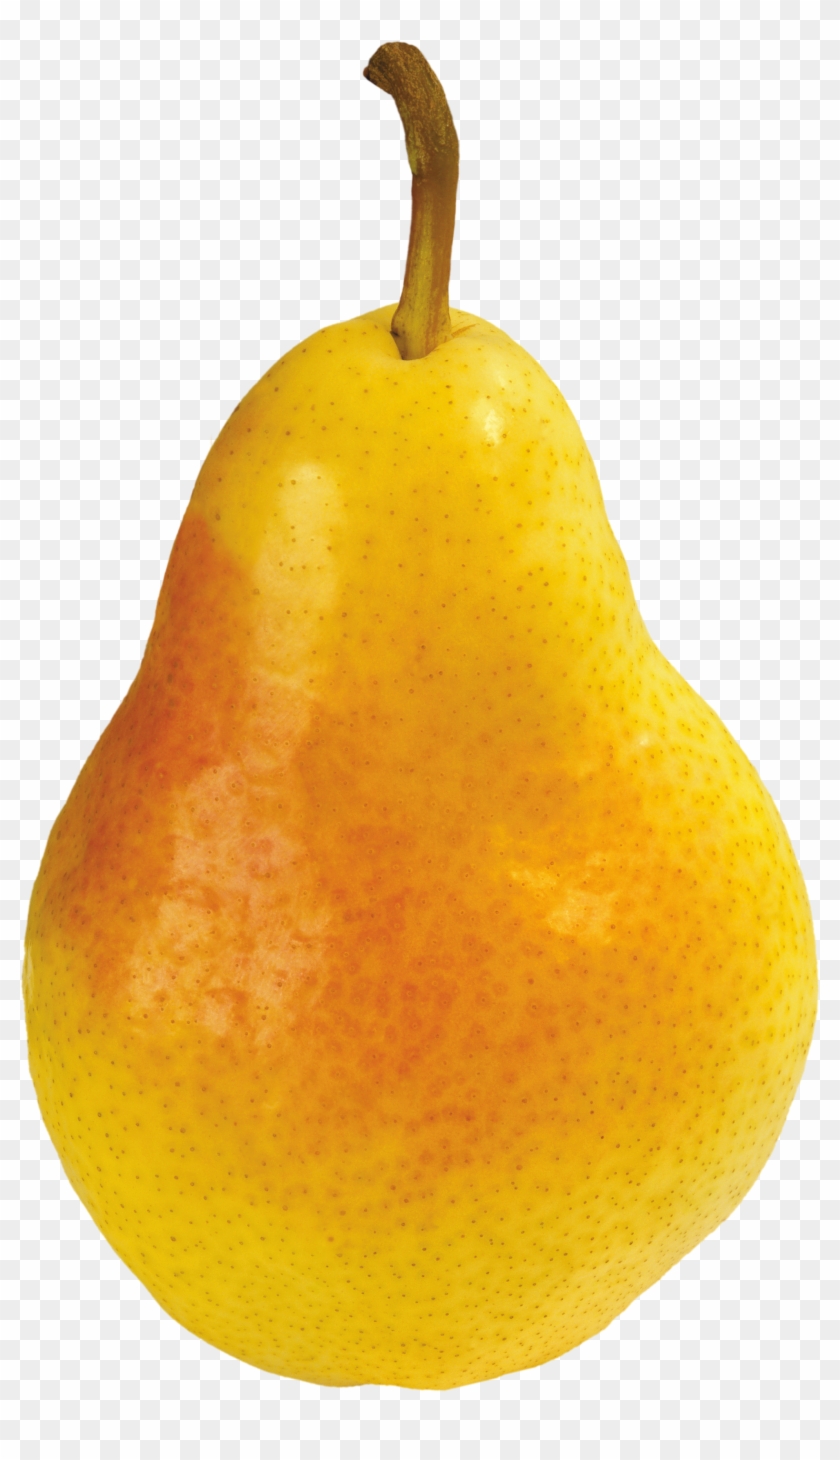 Download - Orange Pear Png Clipart #430329